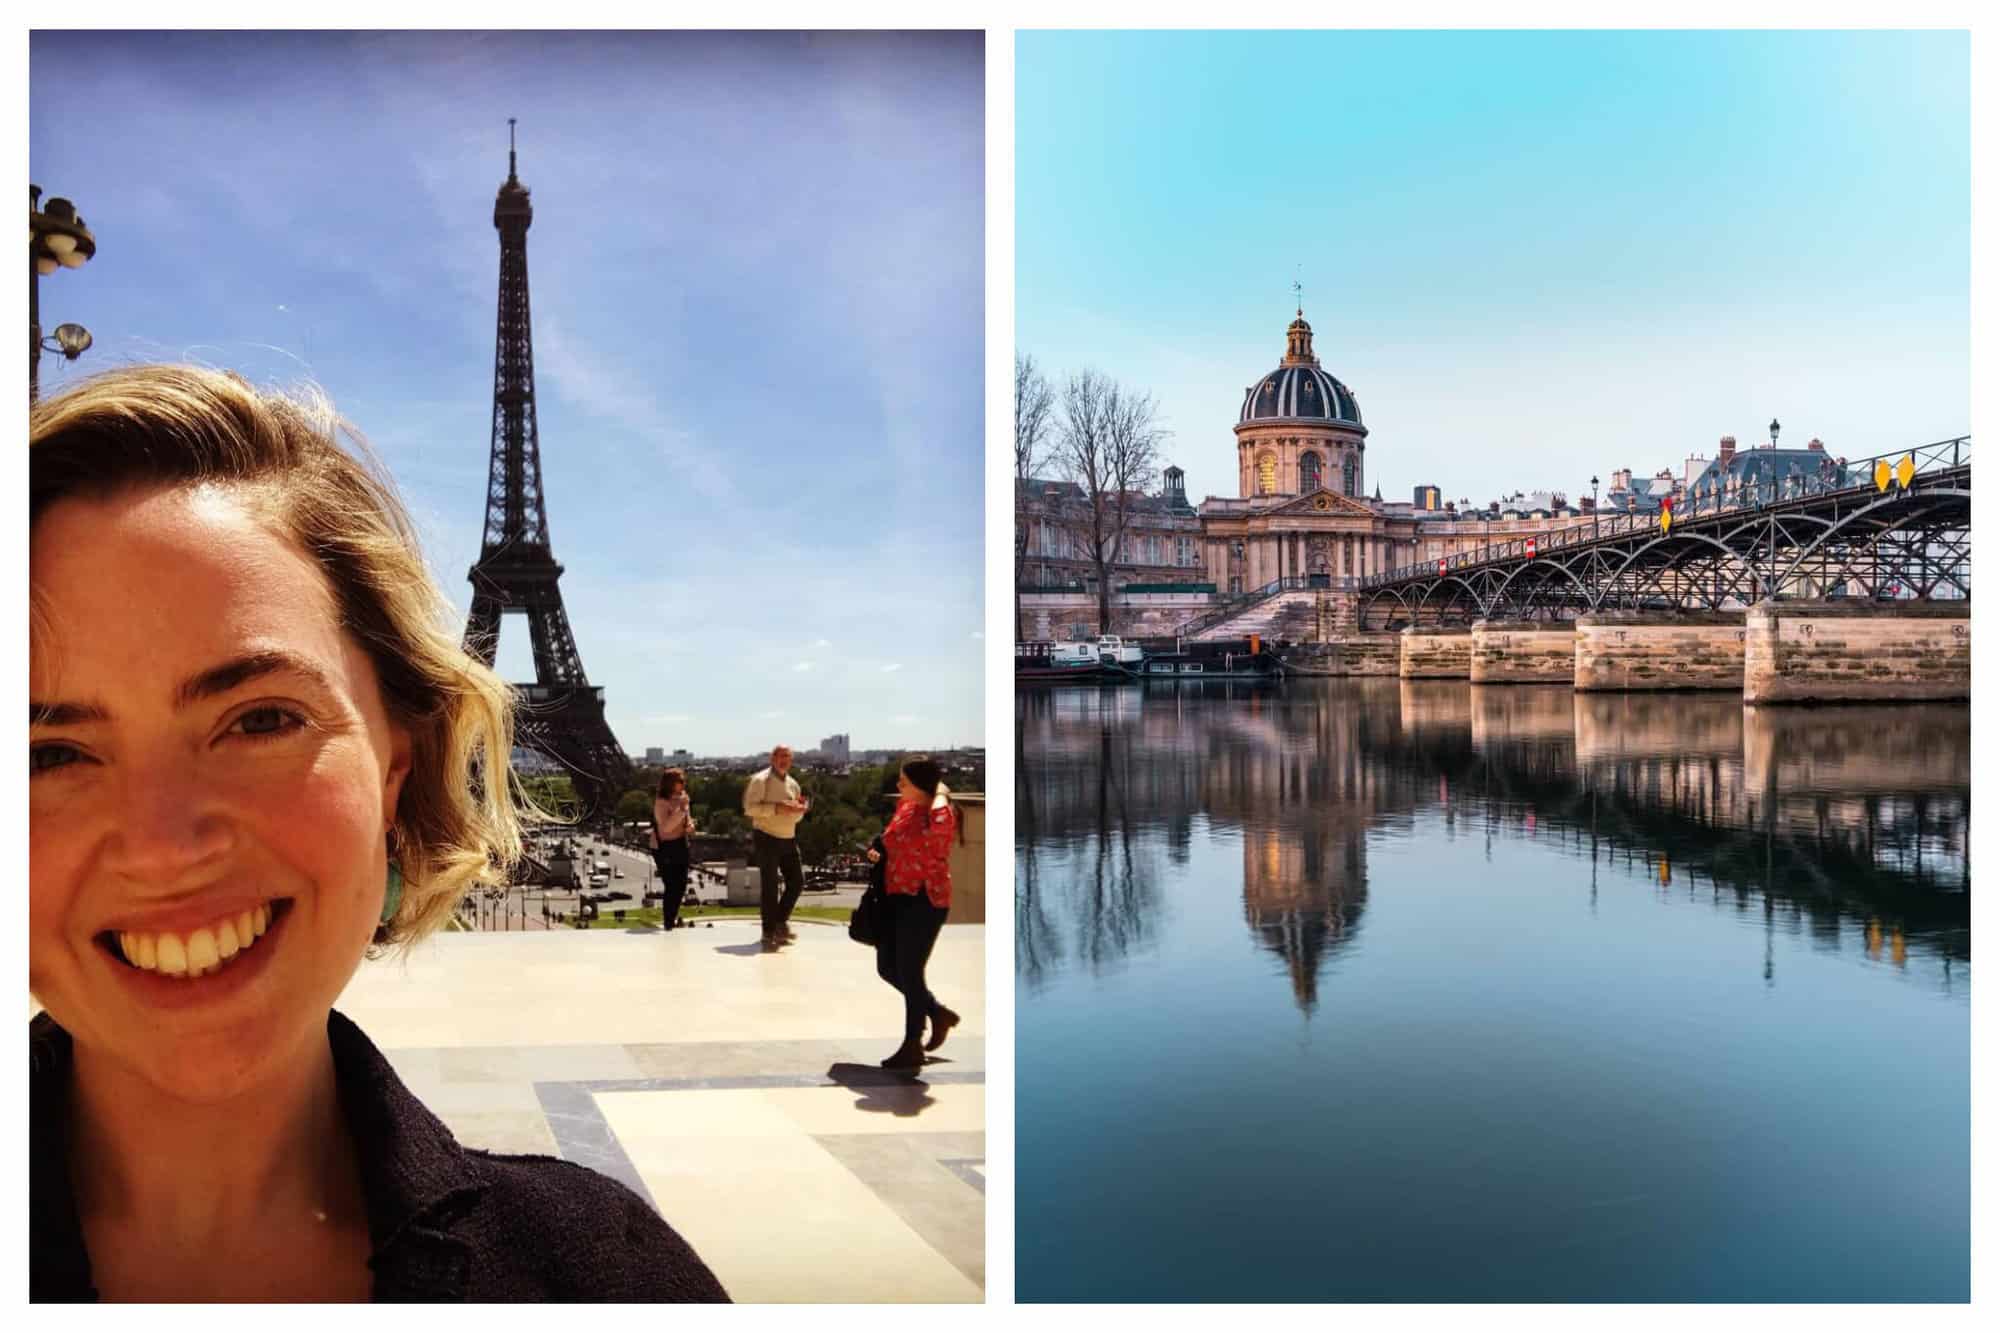 left: tatty mcleod smiling and posing in infront of the Eiffel Tower in Paris. 
right: a photo of pont des arts with its reflection clearly visible on the Seine. 